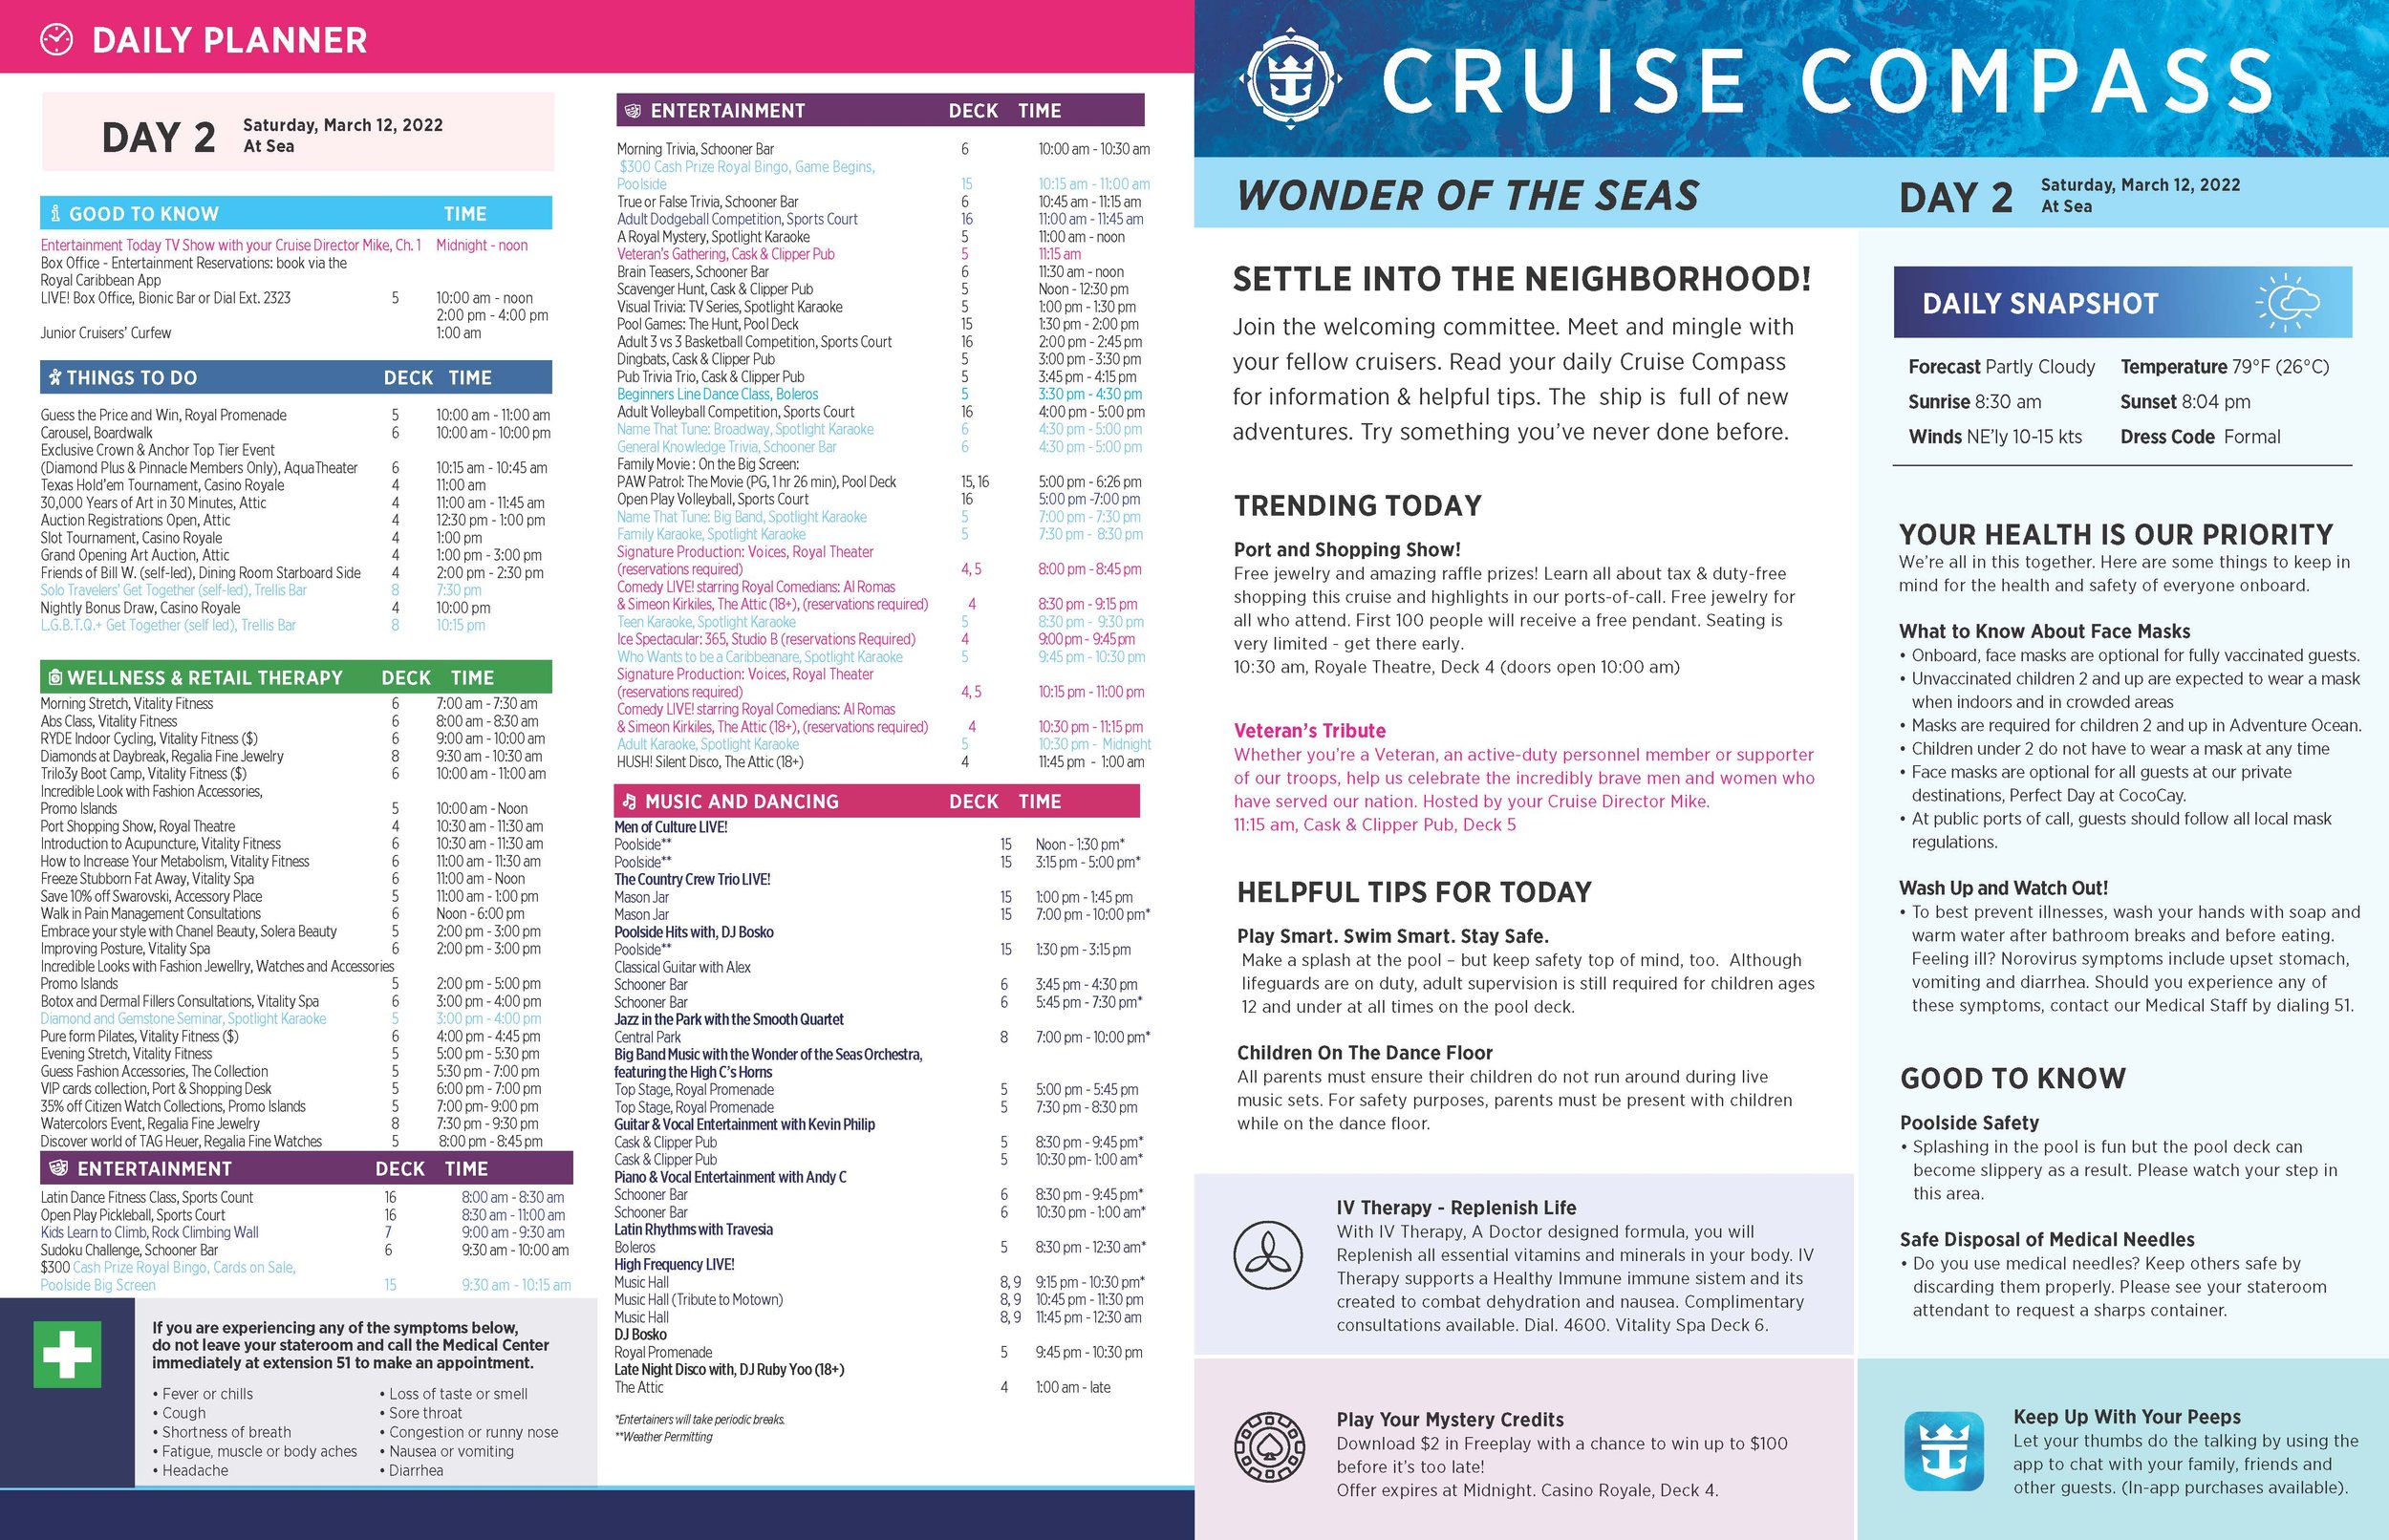 Cruise Compass - Day 2 - Saturday, March 12. 2022,  At Sea_Page_1.jpg